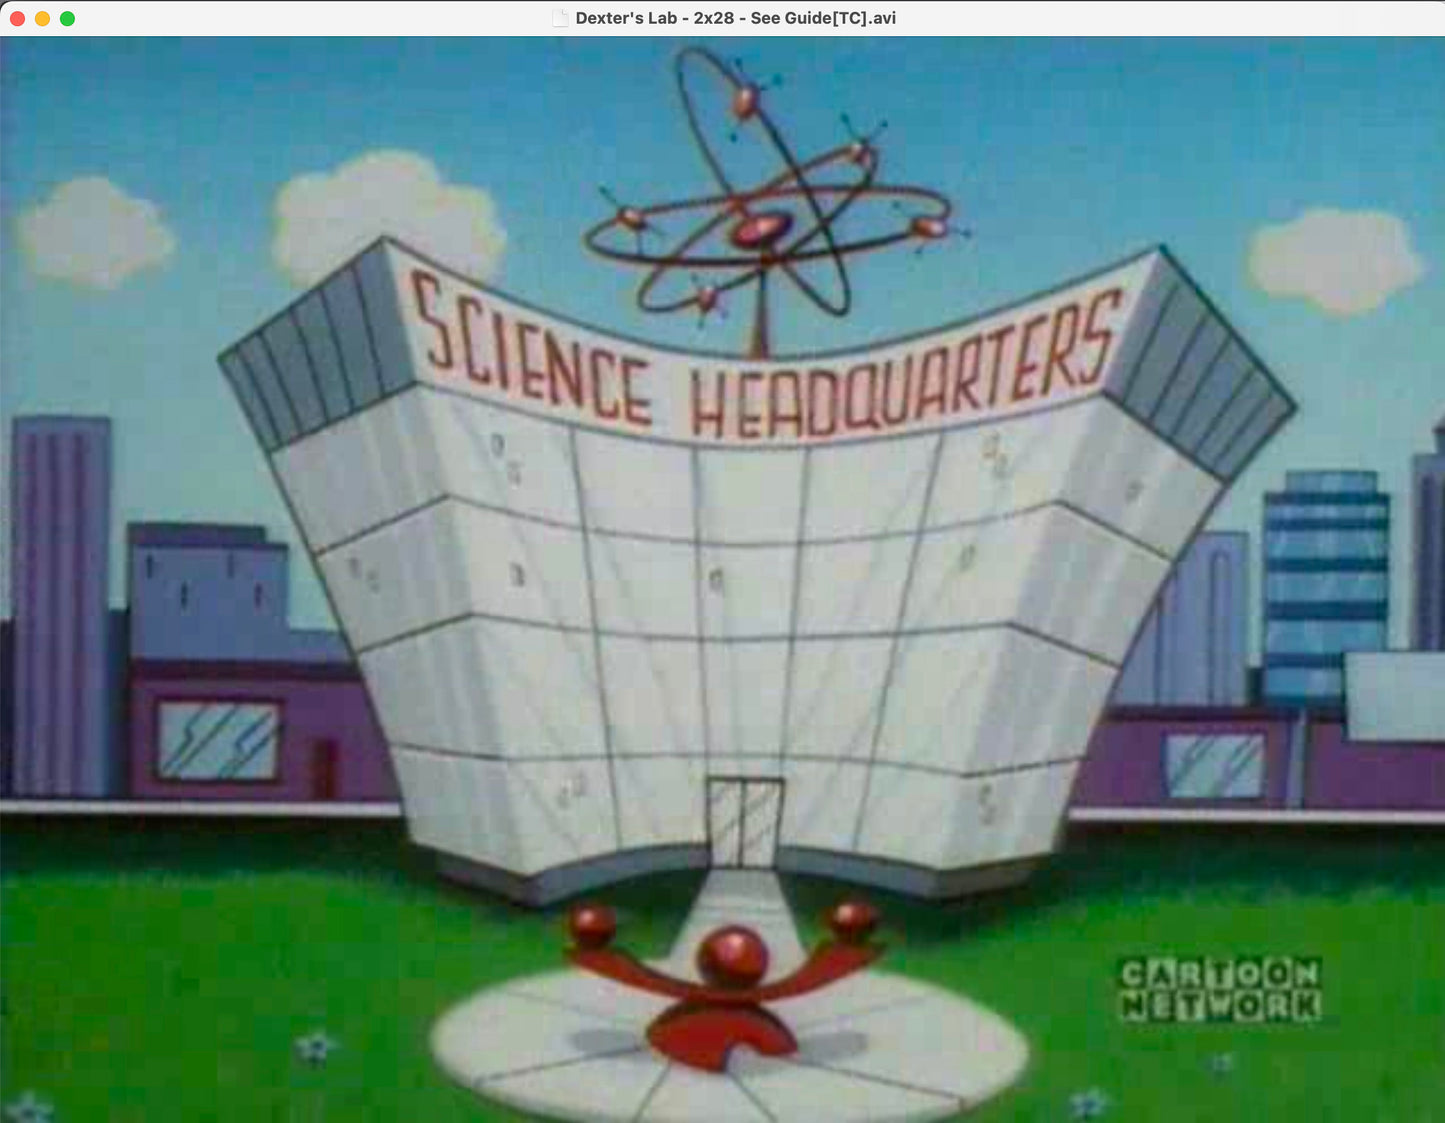 Dexters LAB Cartoon Production Animation Background of Science Headquarters from Cartoon Network with COA and Seal 8